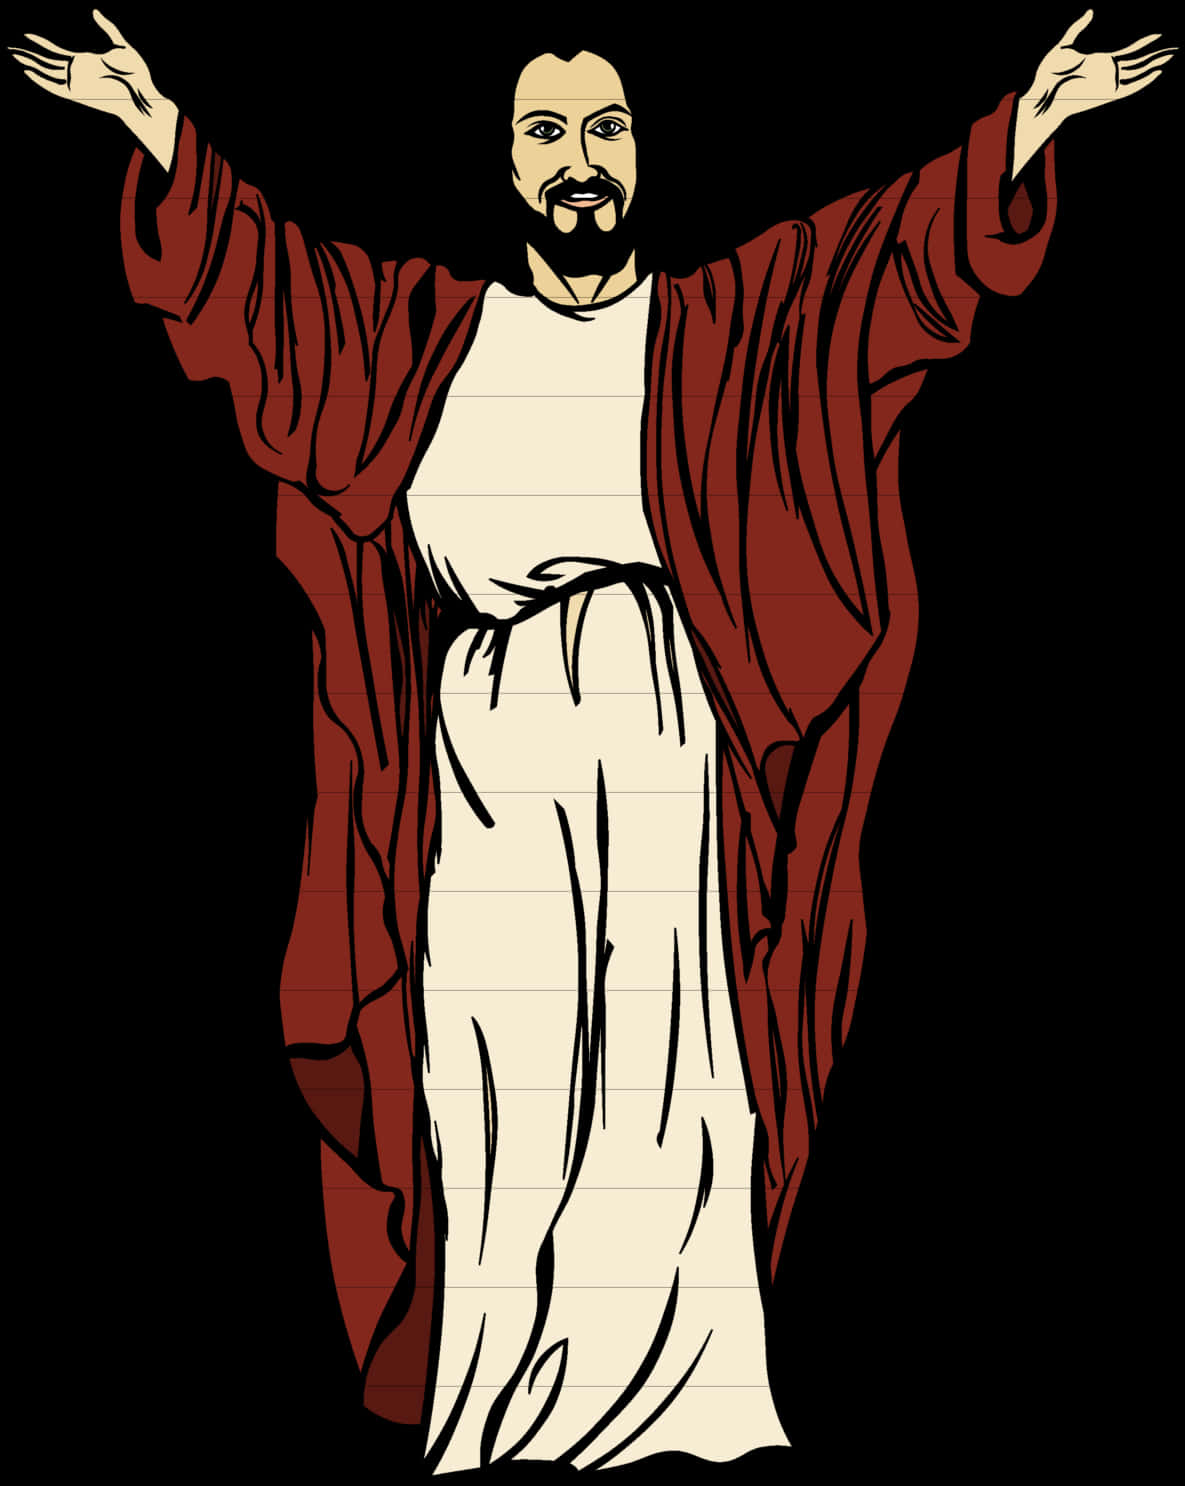 A Man In A Robe With His Arms Up